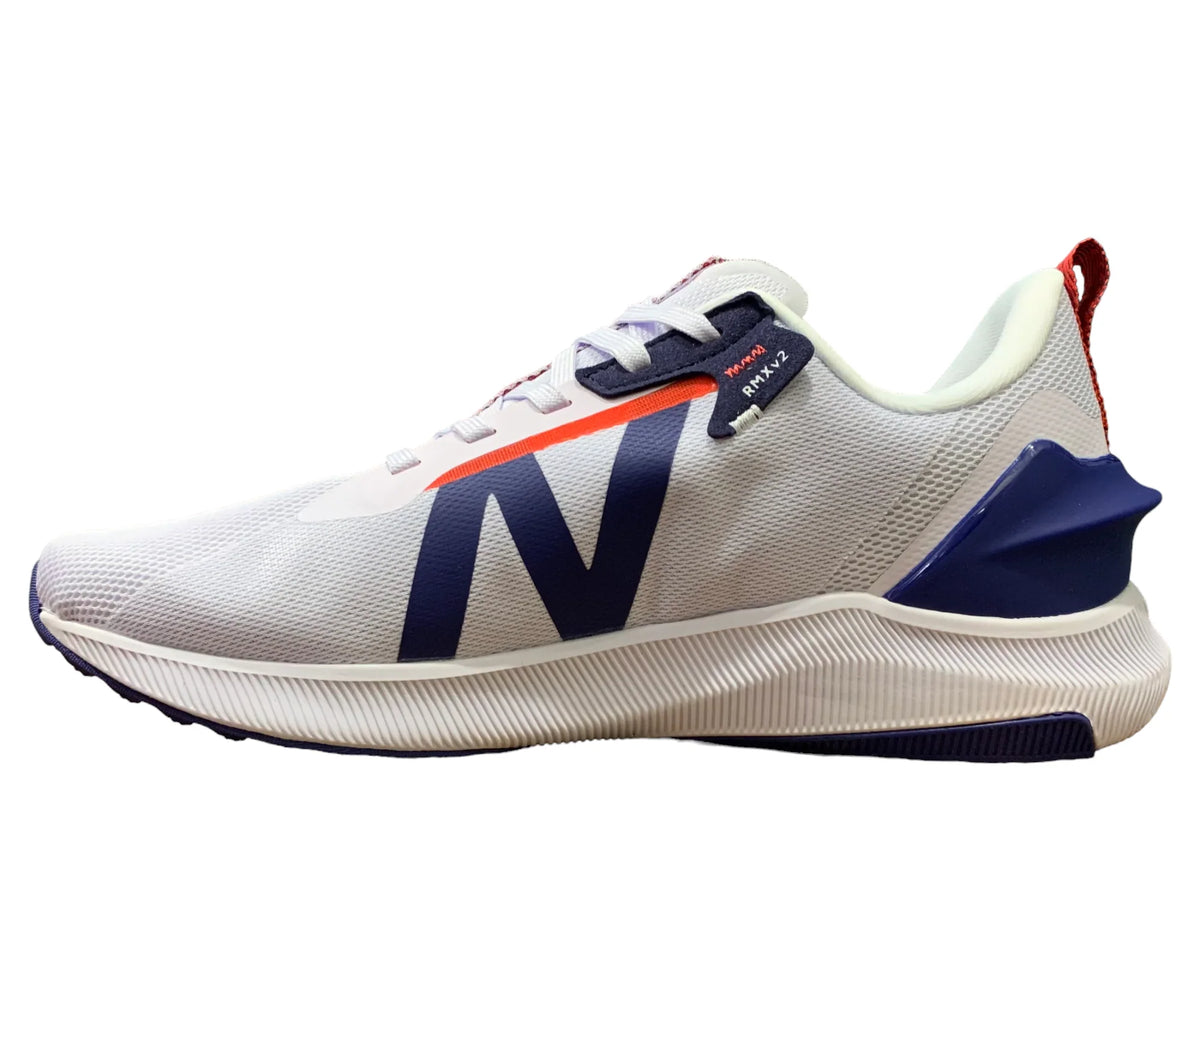 New Balance FuelCell